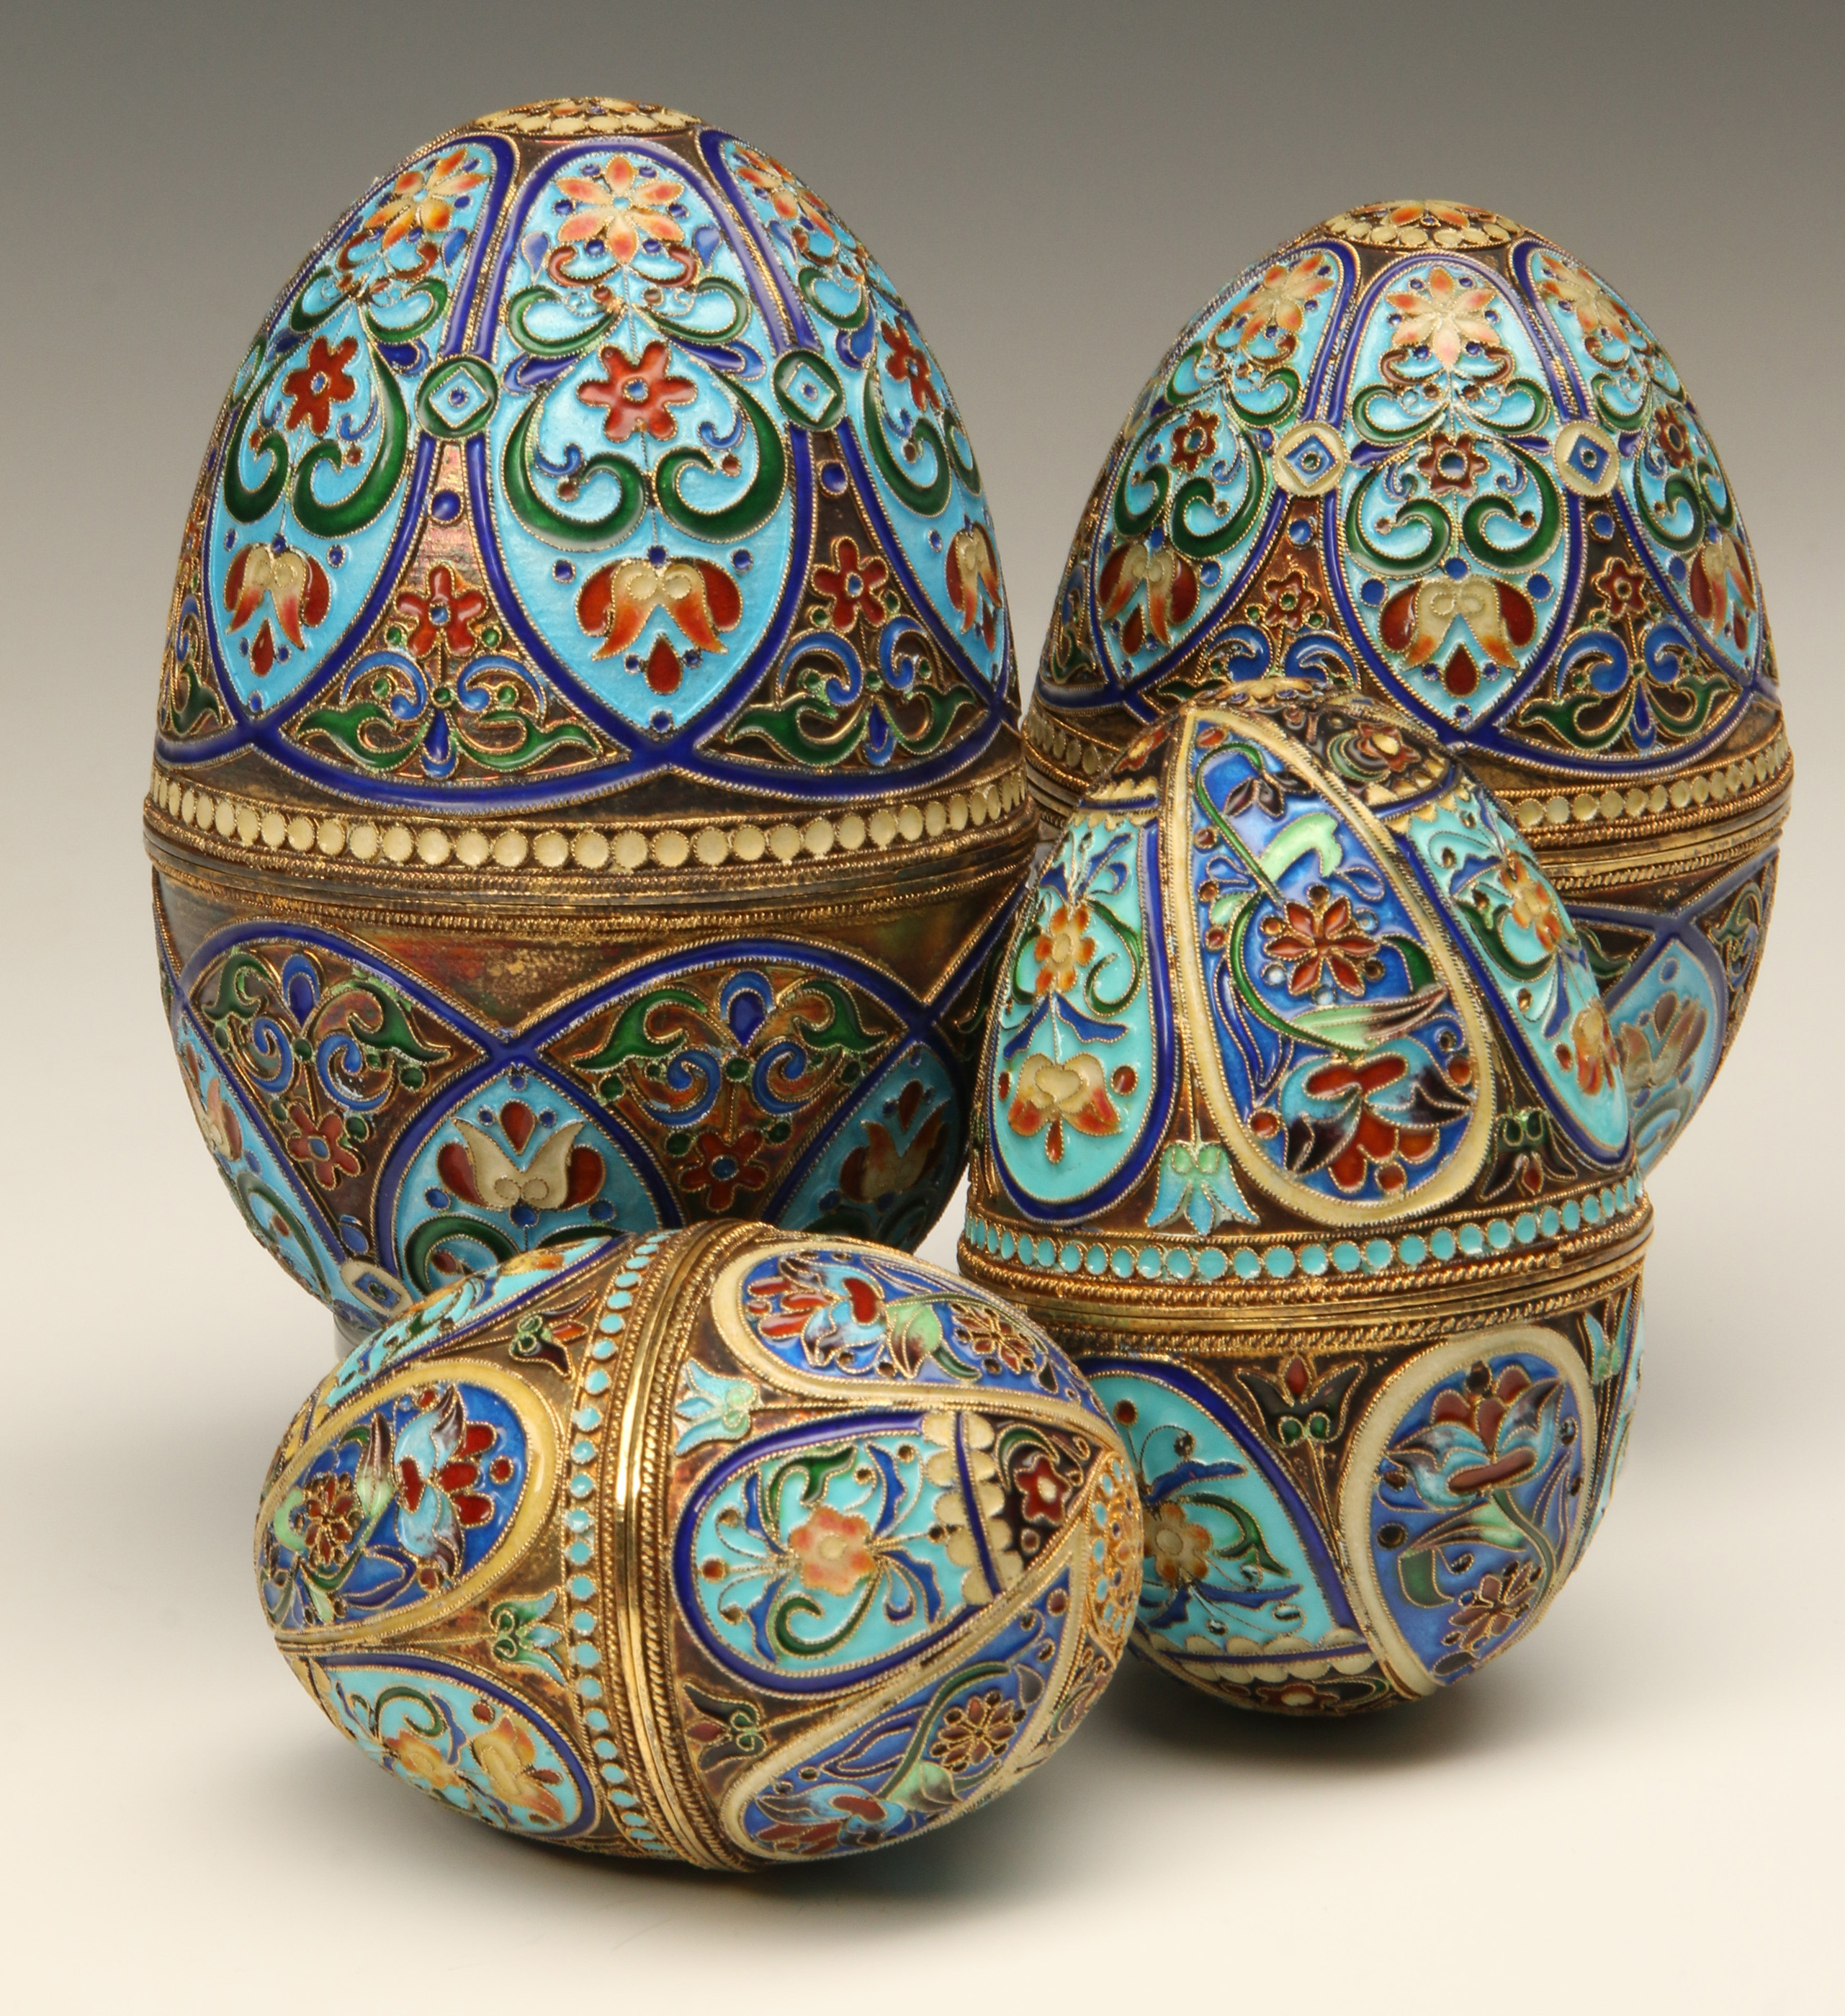 FOUR 20TH CENTURY ENAMELED STERLING CHAMPLEVE EGGS